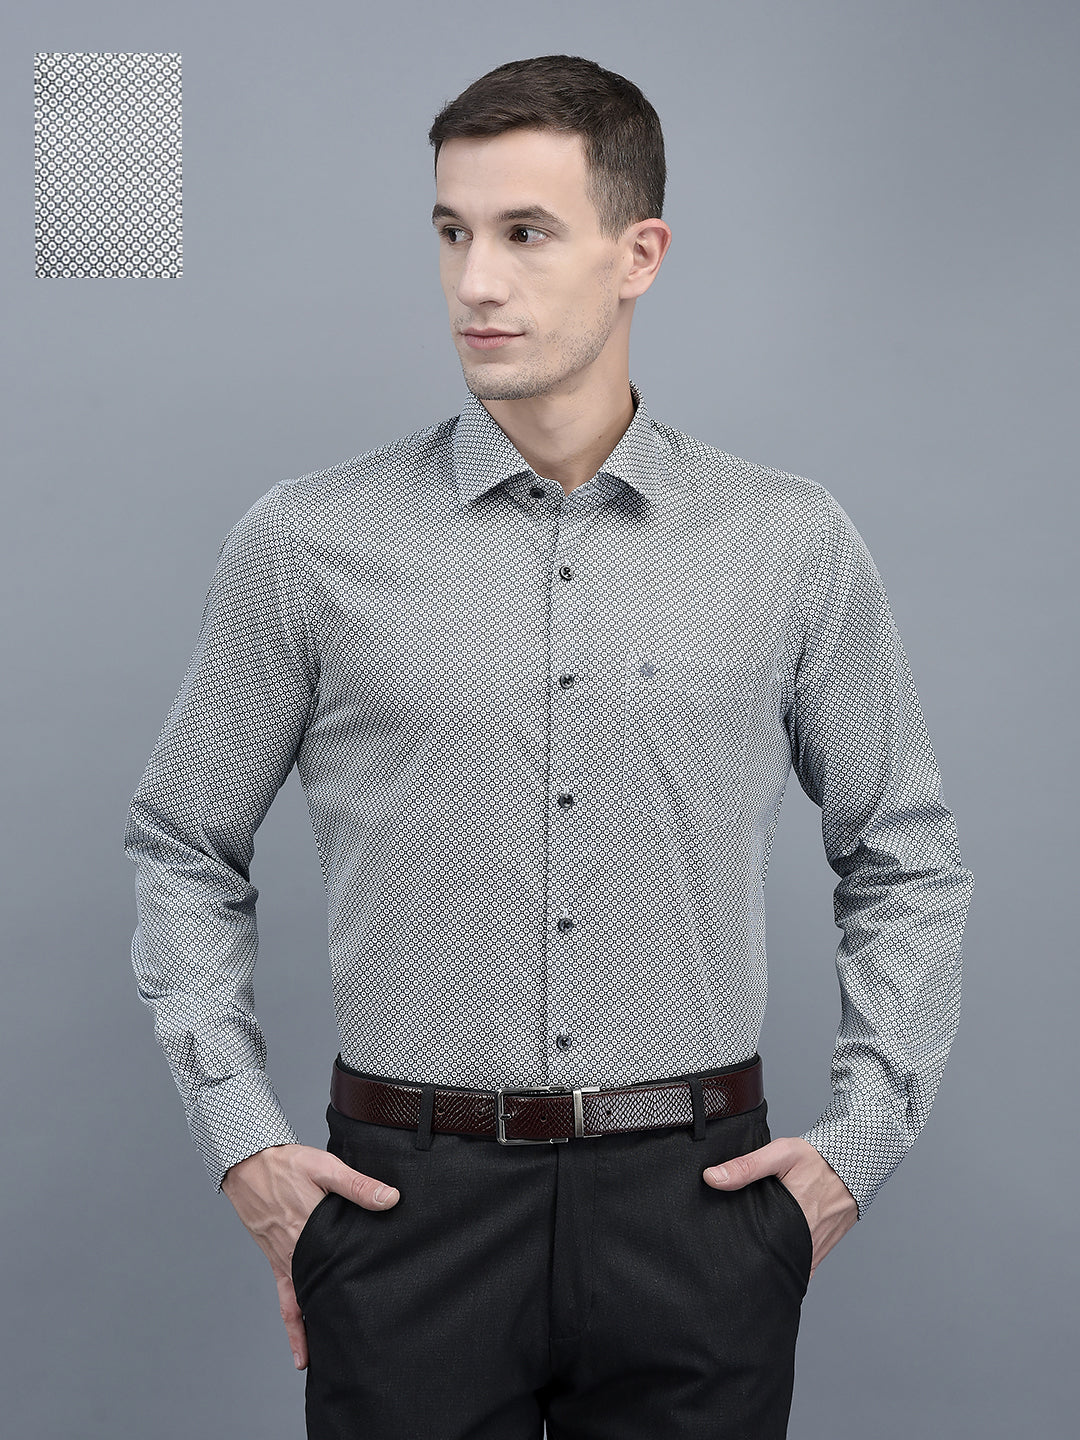 Refine Your Style with our Cobb Navy Printed Slim Fit Formal Shirt